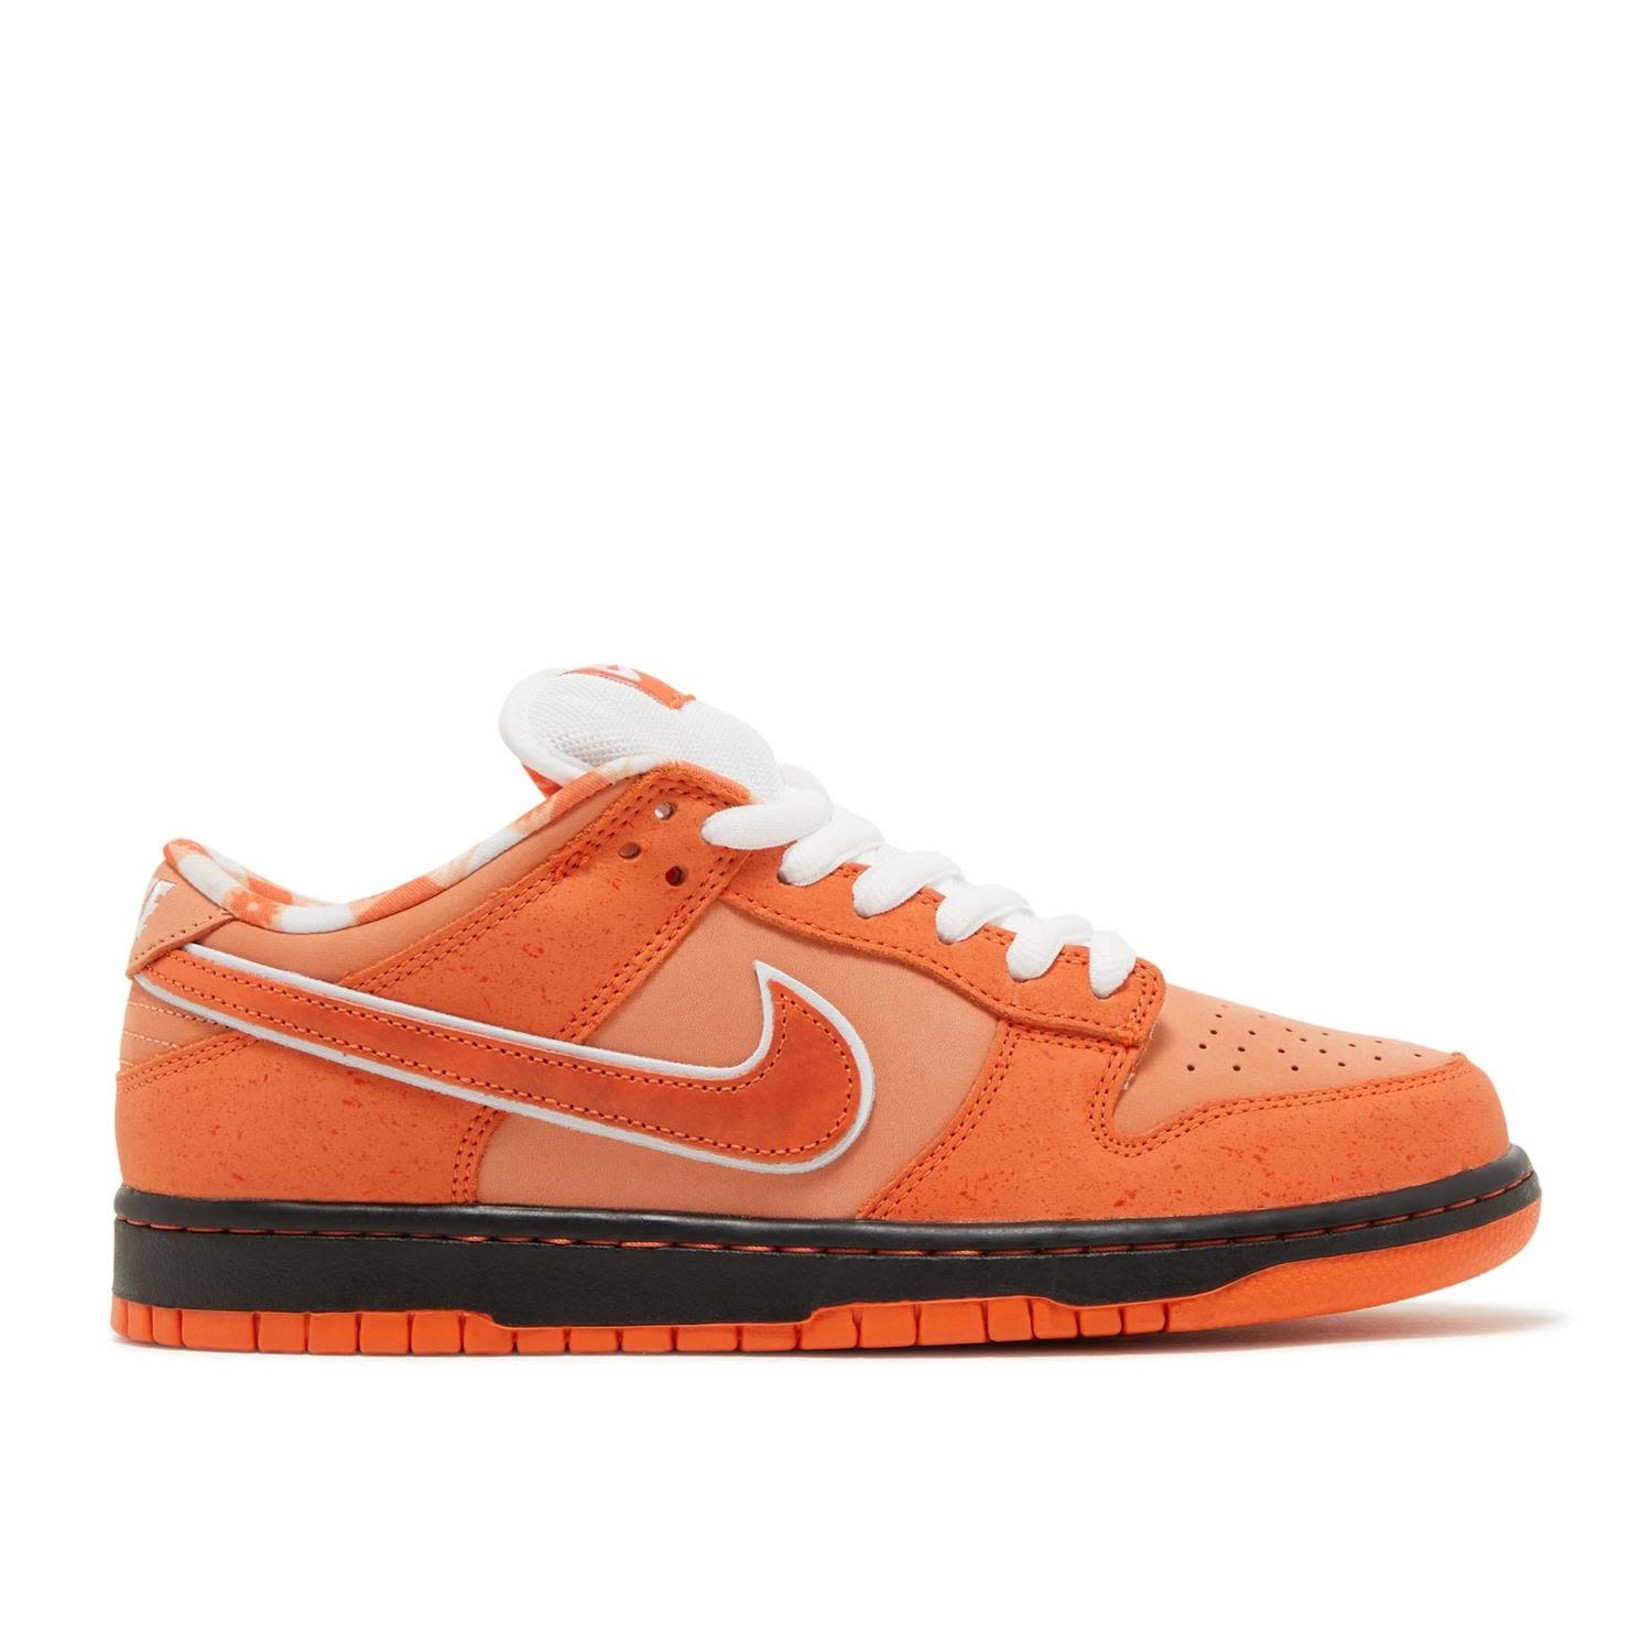 Nike Nike SB Dunk Low Concepts Orange Lobster Size 12, DS BRAND NEW